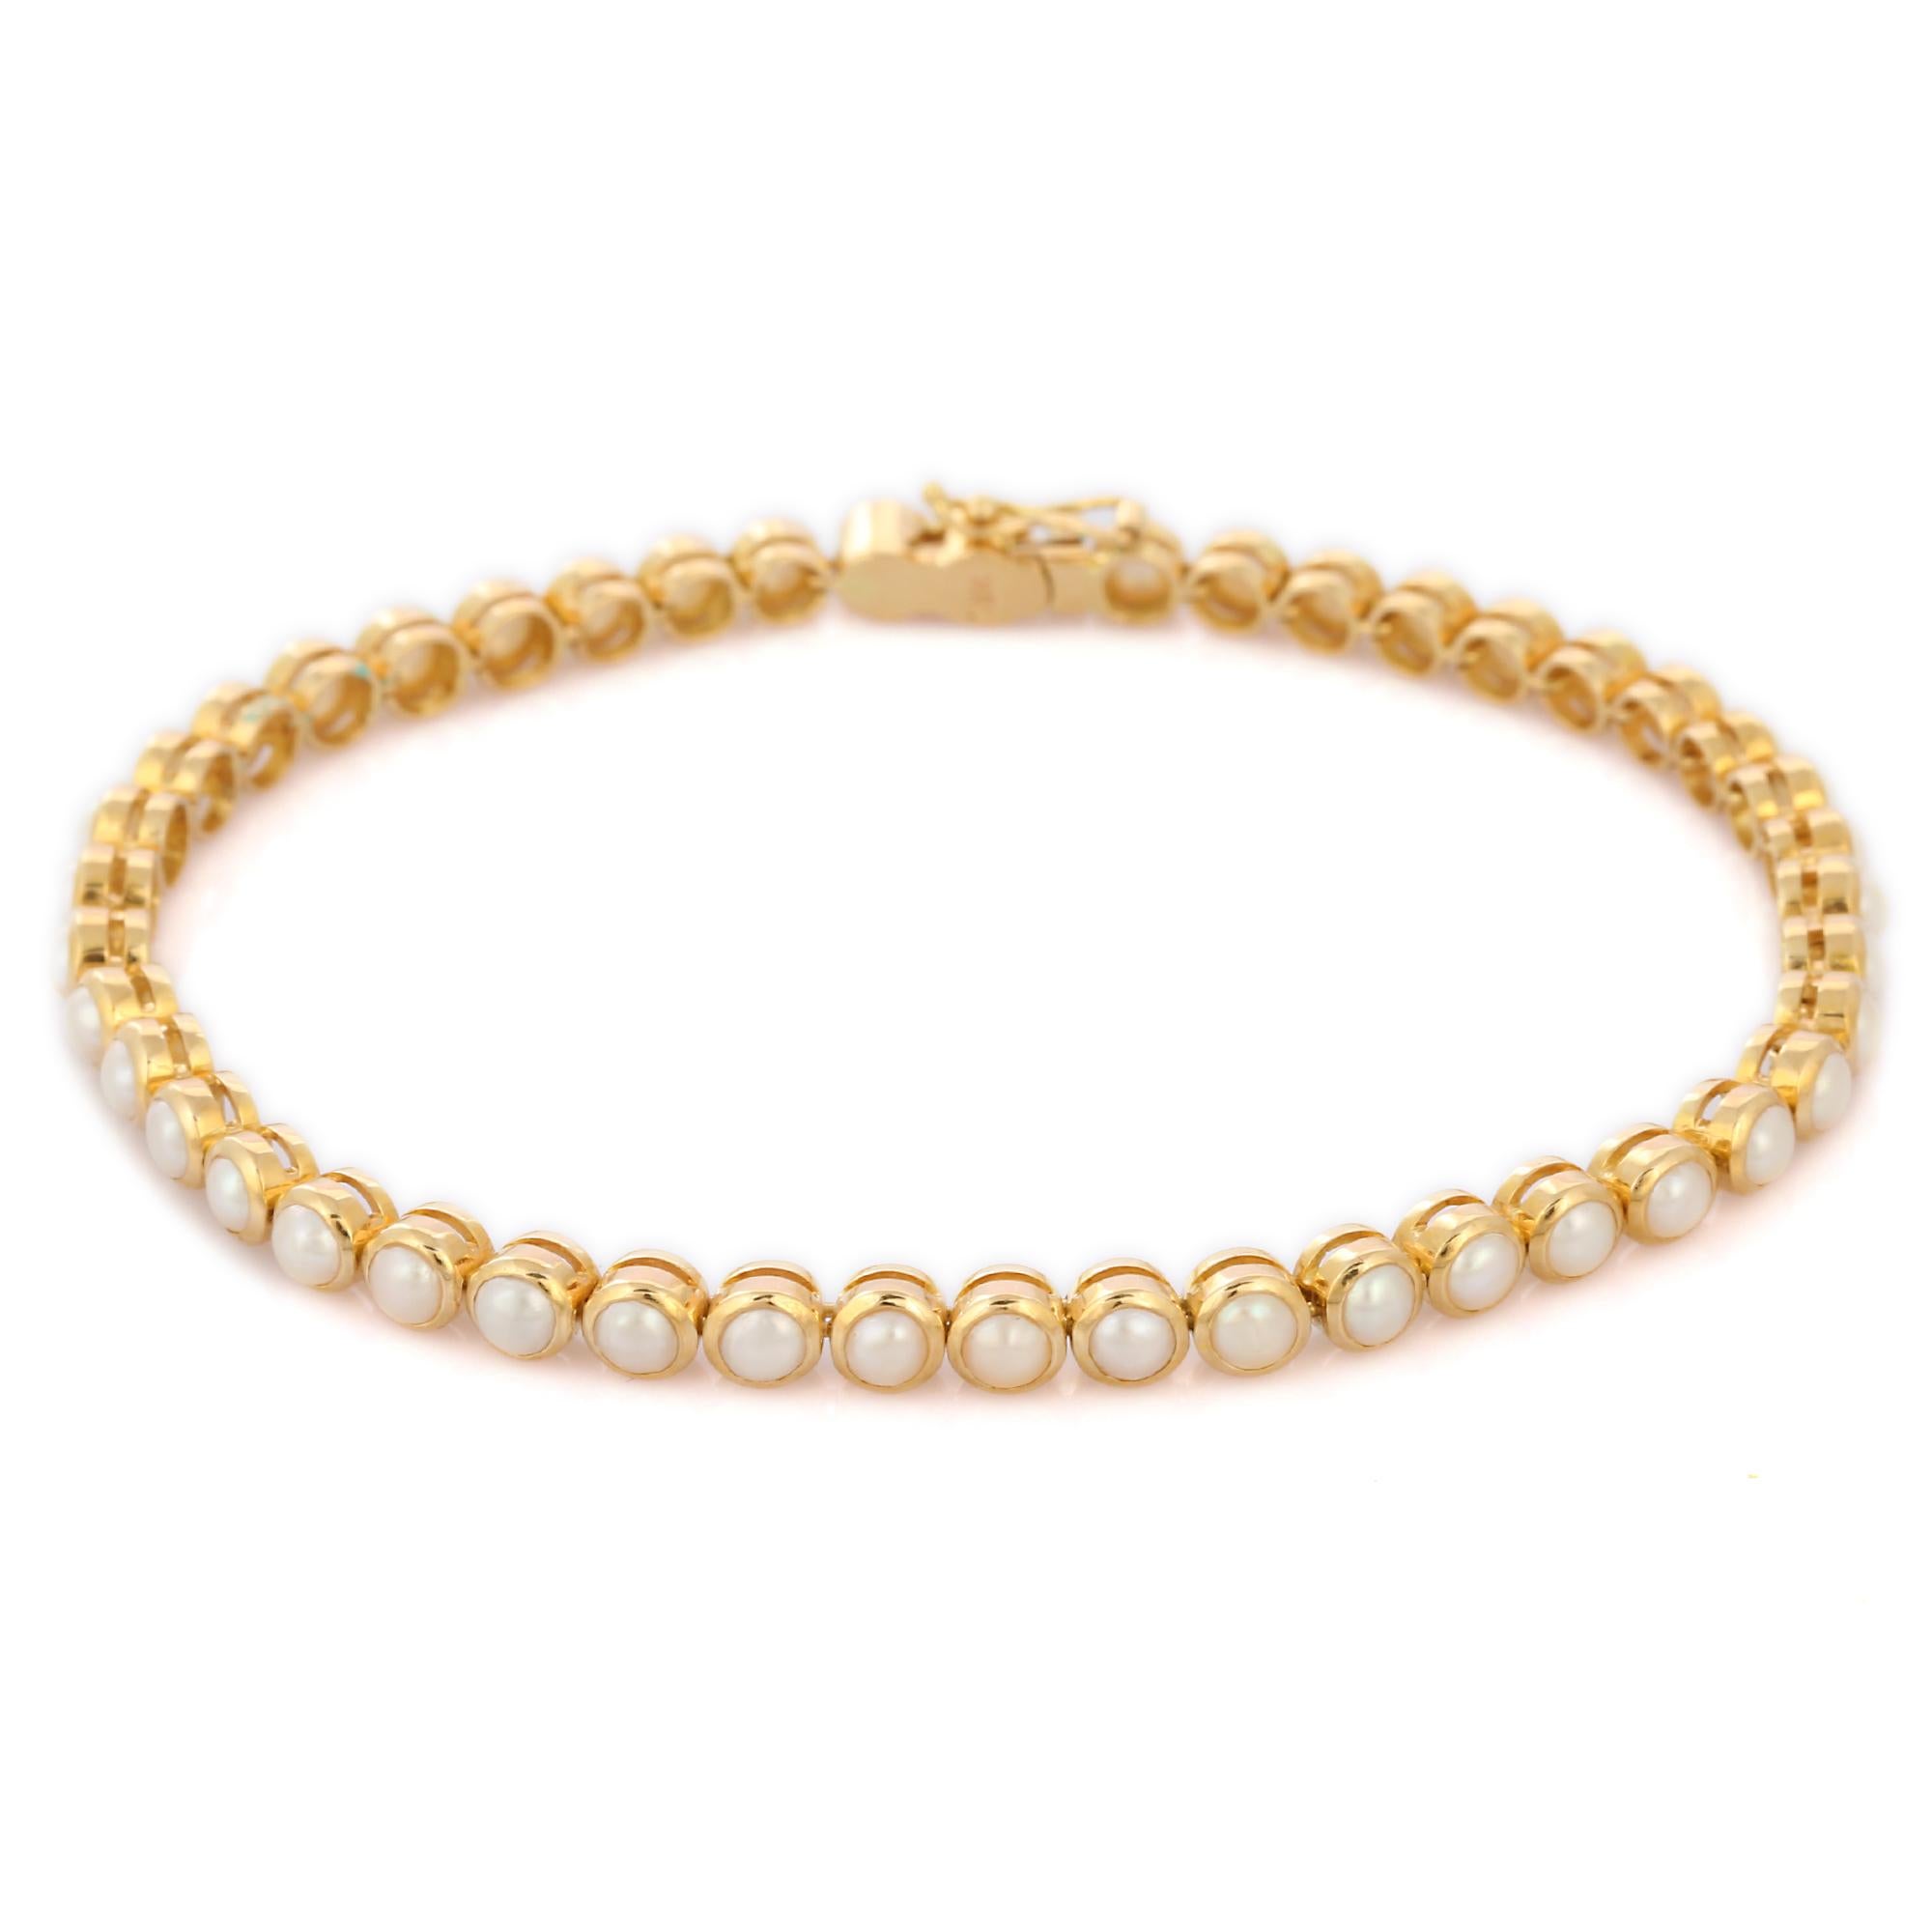 Pearl bracelet in 18K Gold. It has a perfect round cut gemstone to make you stand out on any occasion or an event. 
A tennis bracelet is an essential piece of jewelry when it comes to your wedding day. The sleek and elegant style complements the